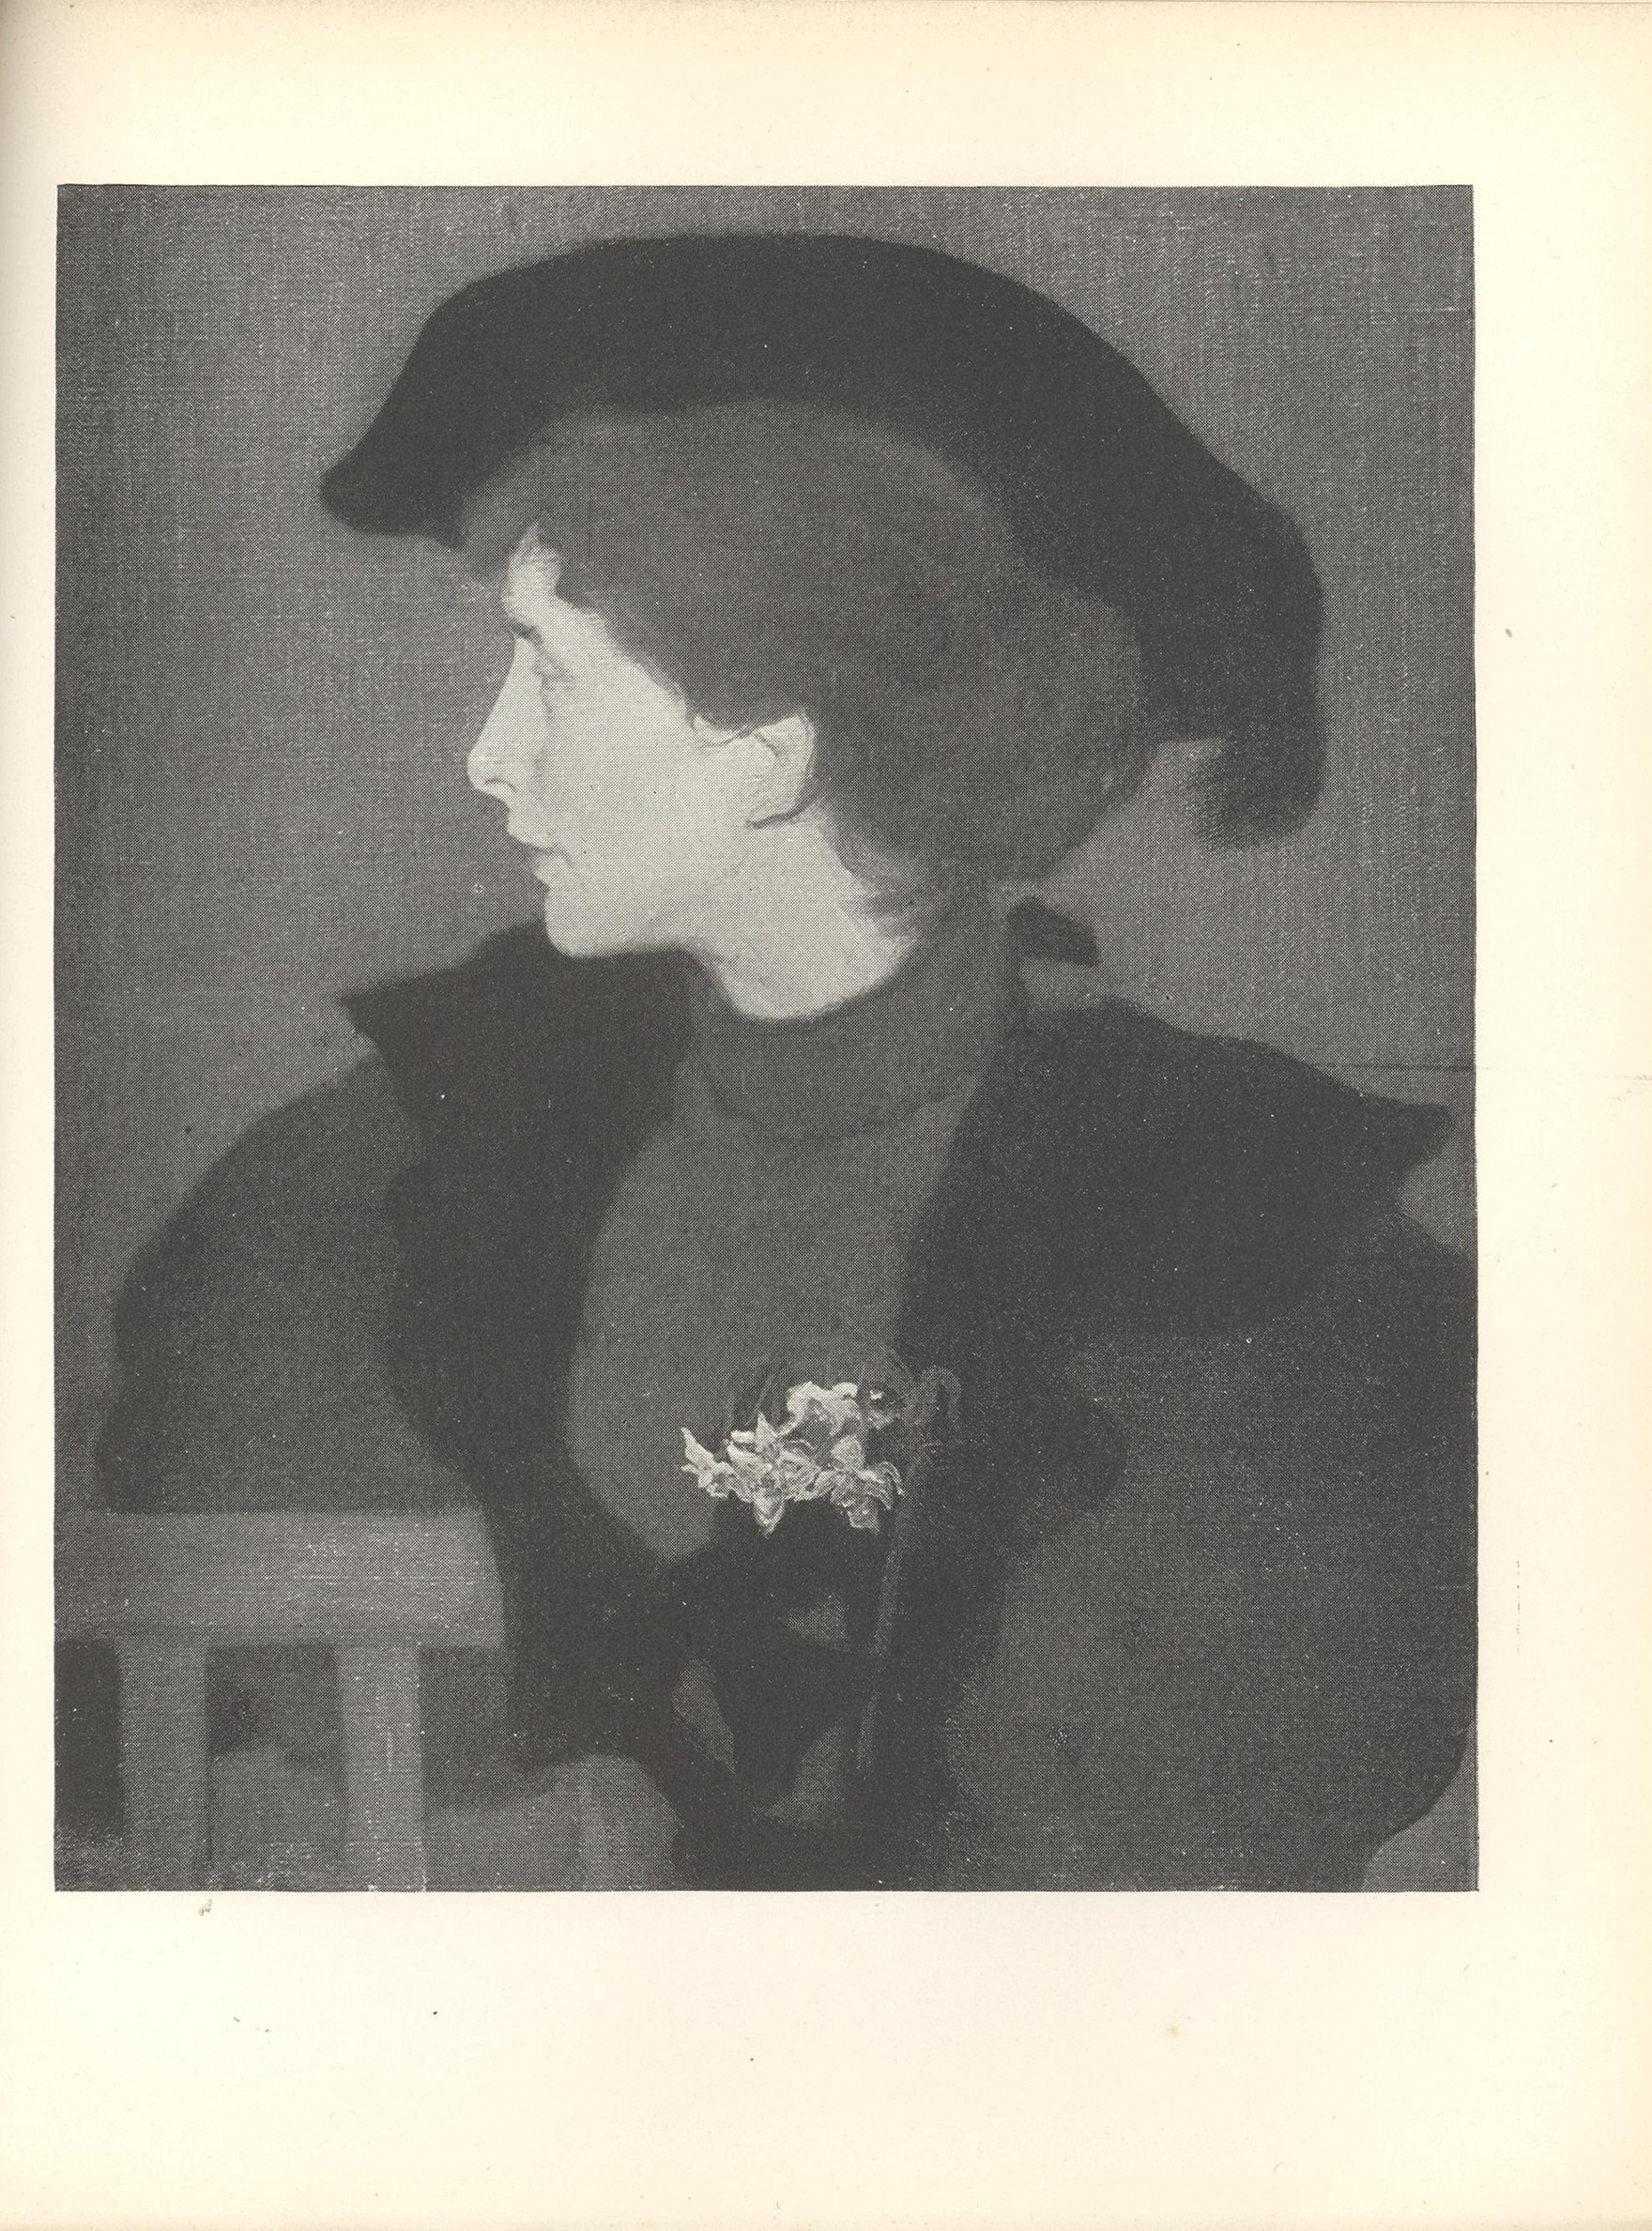 Image is the torso of a seated woman wearing a black hat with feather She is dressed in outside clothes with a white corsage in the lapel of her cloak She is sitting on a chair that s facing frontward with her head turned in profile to the left Her shoulders divide the pictorial space in half horizontally The chair is in the bottom left hand corner of the frame The background is open and dark coloured The image is vertically displayed.